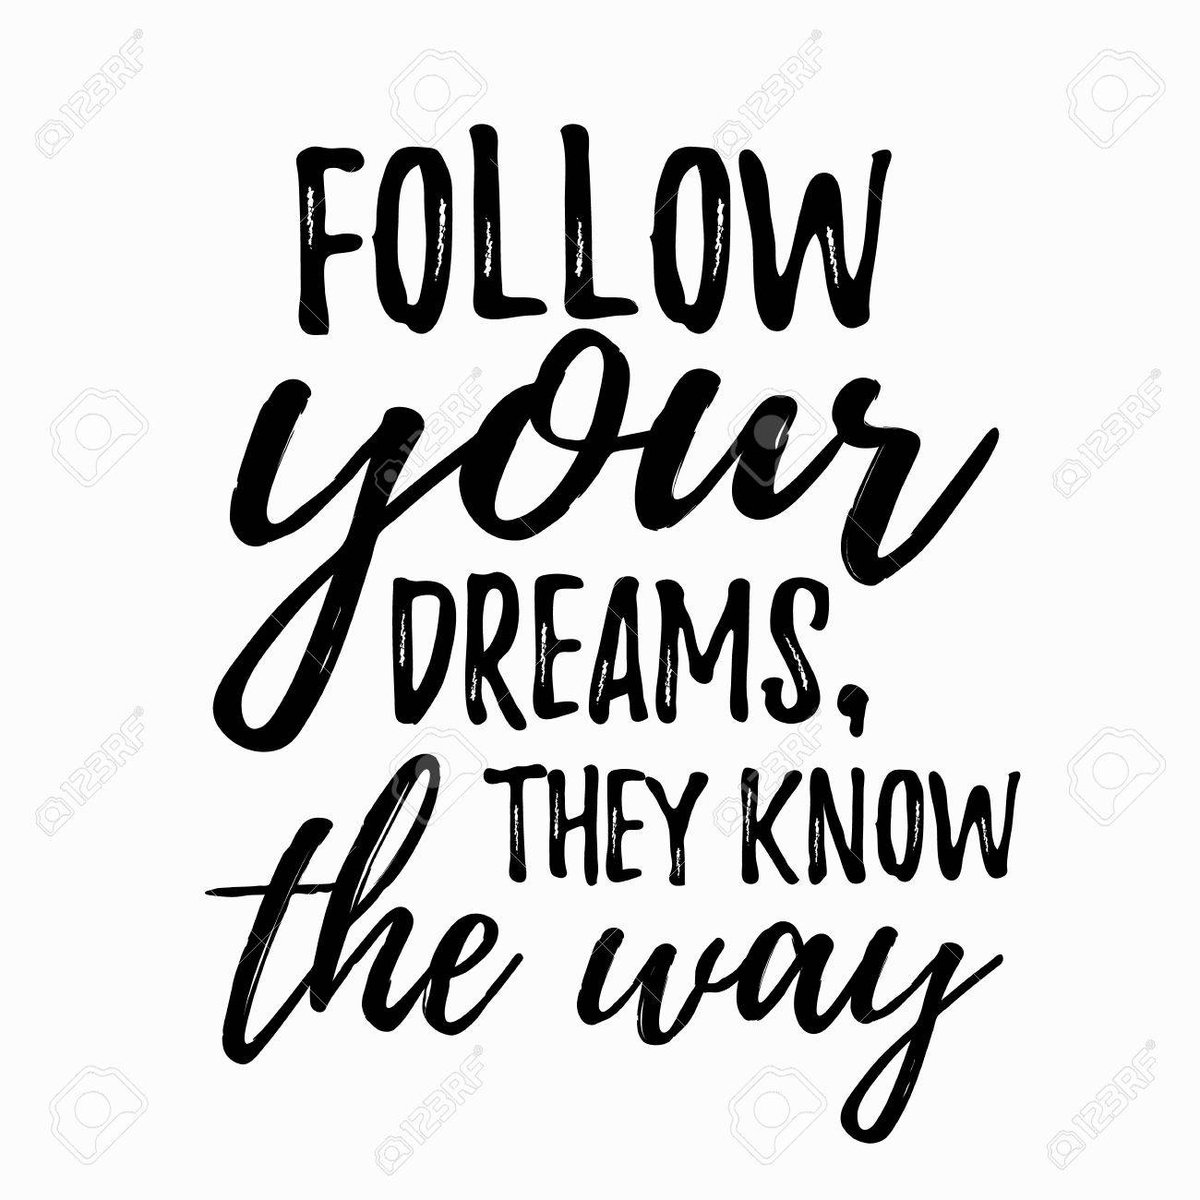 Follow your dreams, they know the way. #WednesdayWisdom #WednesdayThoughts #GoldenHearts #Dreams #ThisWay